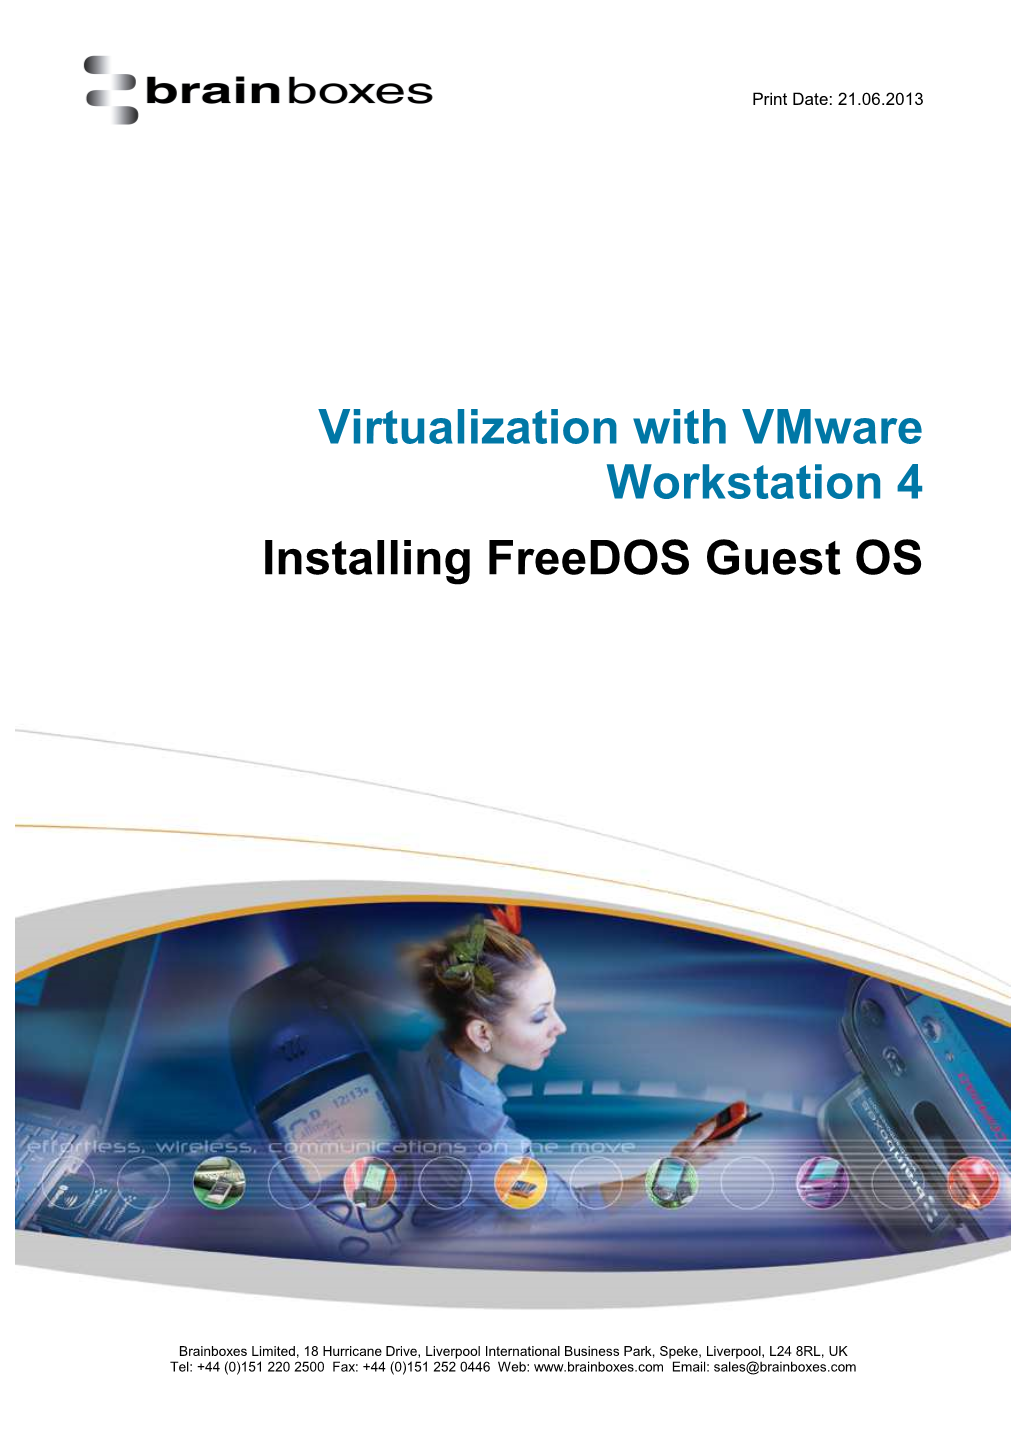 Virtualization with Vmware Workstation 4 Installing Freedos Guest OS